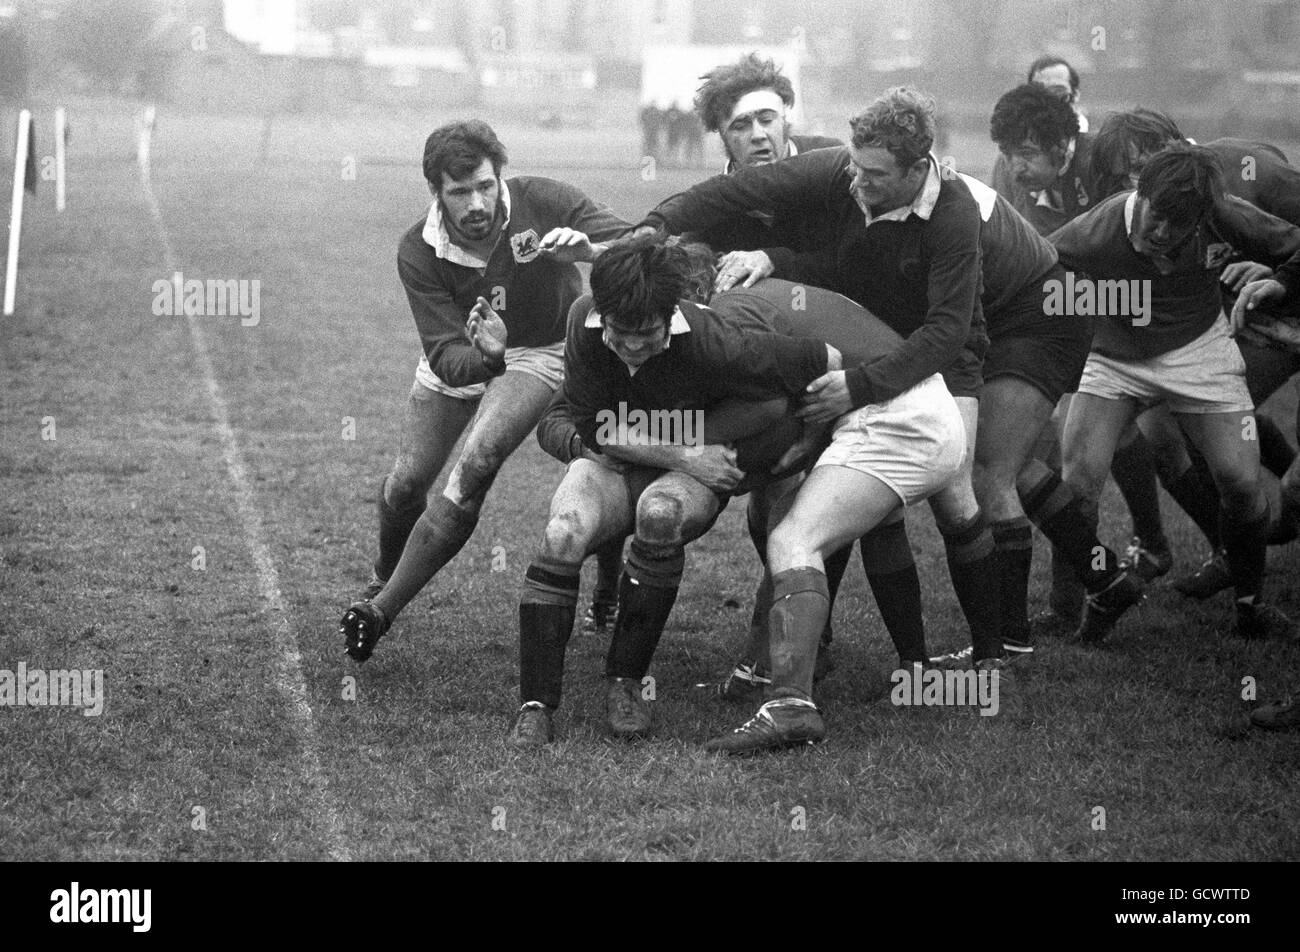 Rugby Union - London Welsh v Saracens. Saracens M. Player, in possession of the ball, comes under attack from London Welsh Stock Photo